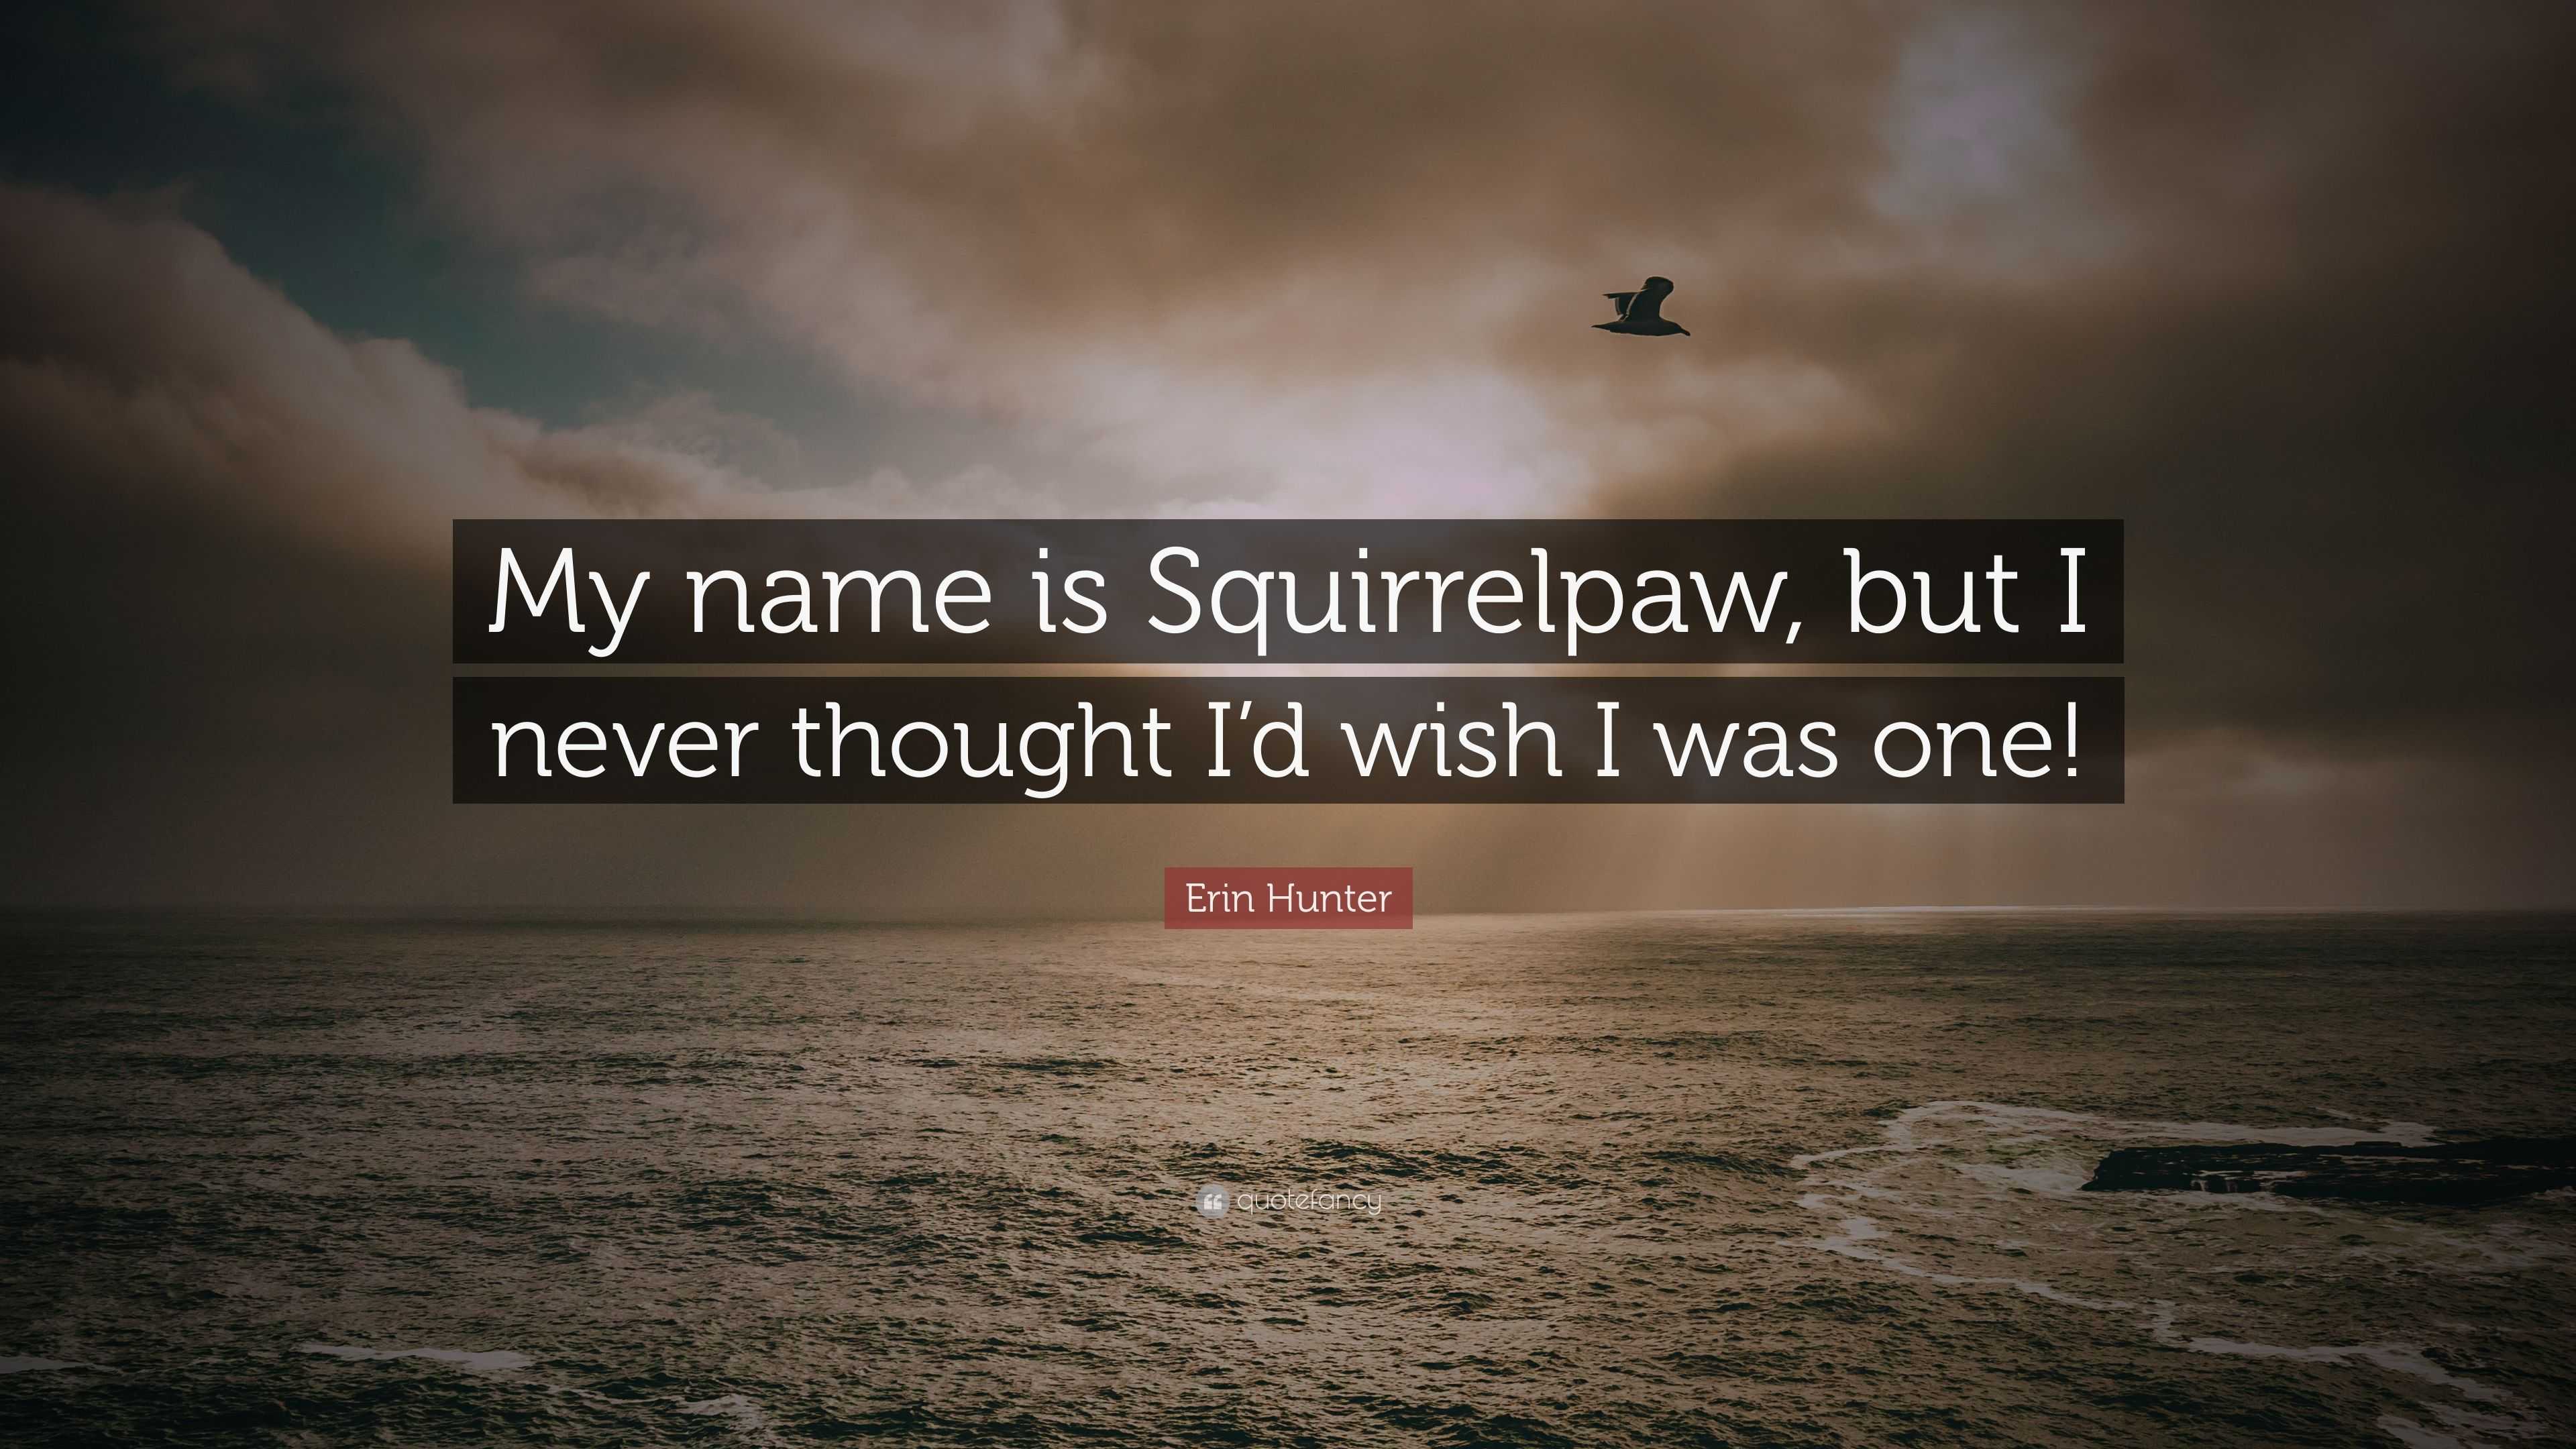 https://quotefancy.com/media/wallpaper/3840x2160/3786094-Erin-Hunter-Quote-My-name-is-Squirrelpaw-but-I-never-thought-I-d.jpg